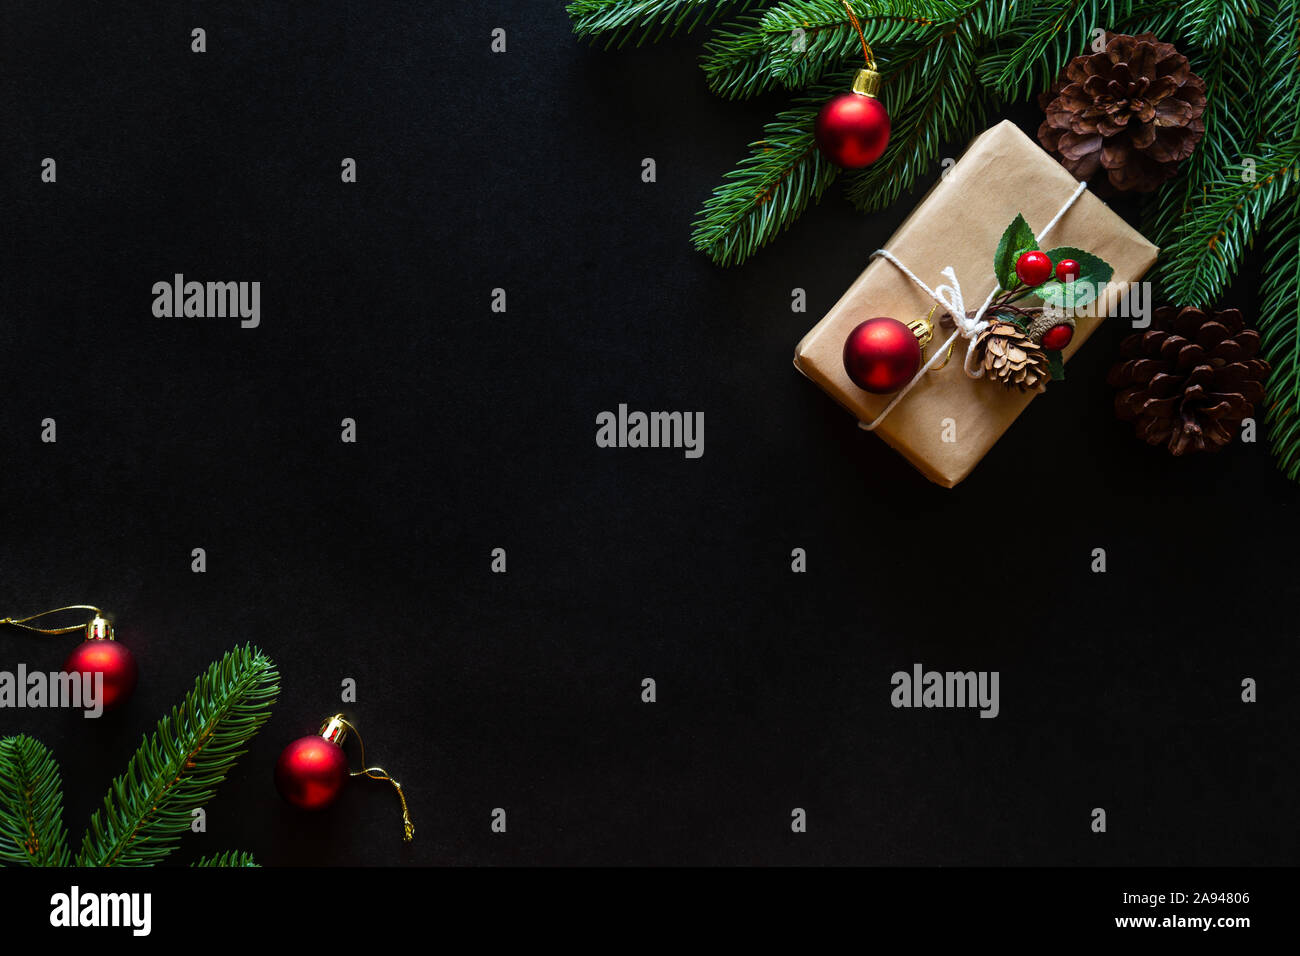 Holiday Christmas card background with festive decoration ball, stars, snowflakes, gift box, pine cones on a black background from Flat lay, top view. Stock Photo